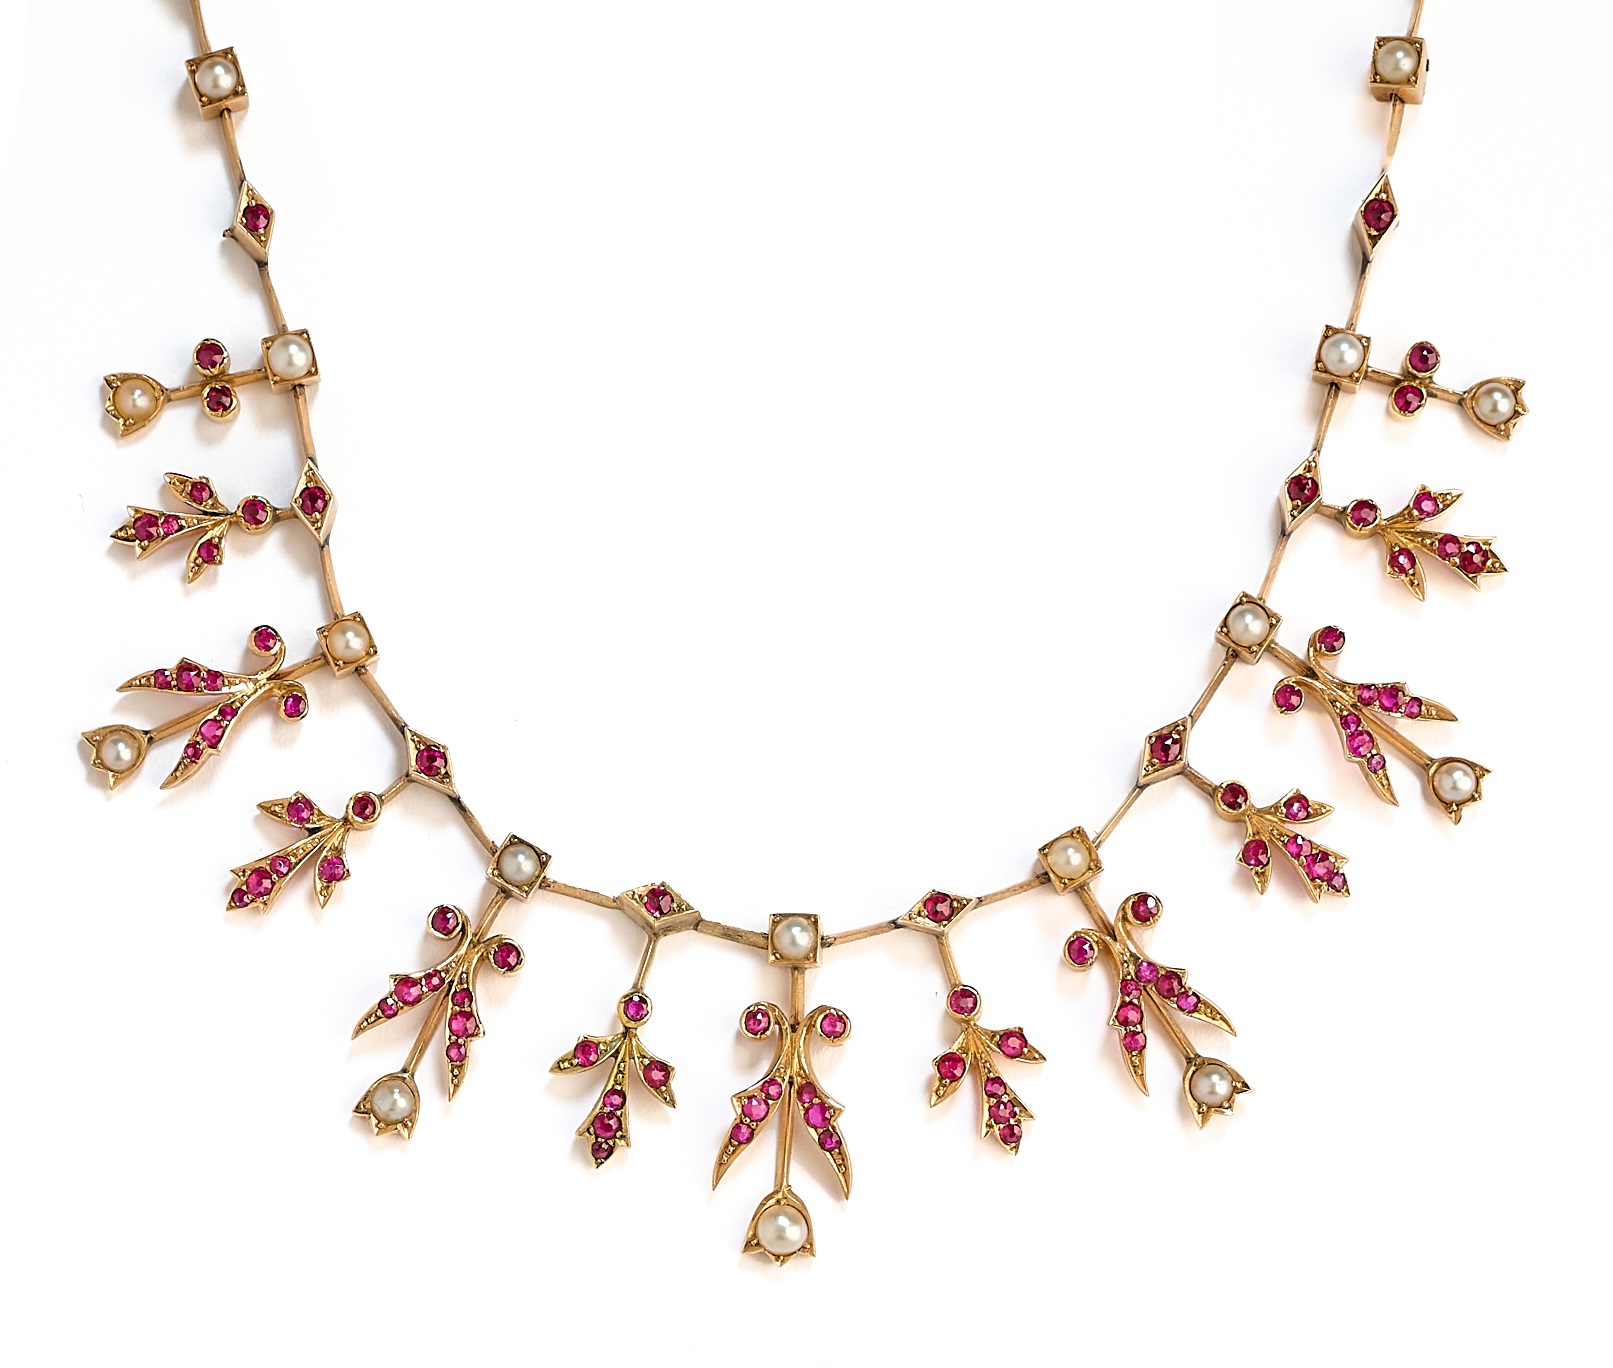 GOLD RUBY AND DIAMOND NECKLACE, 1890s